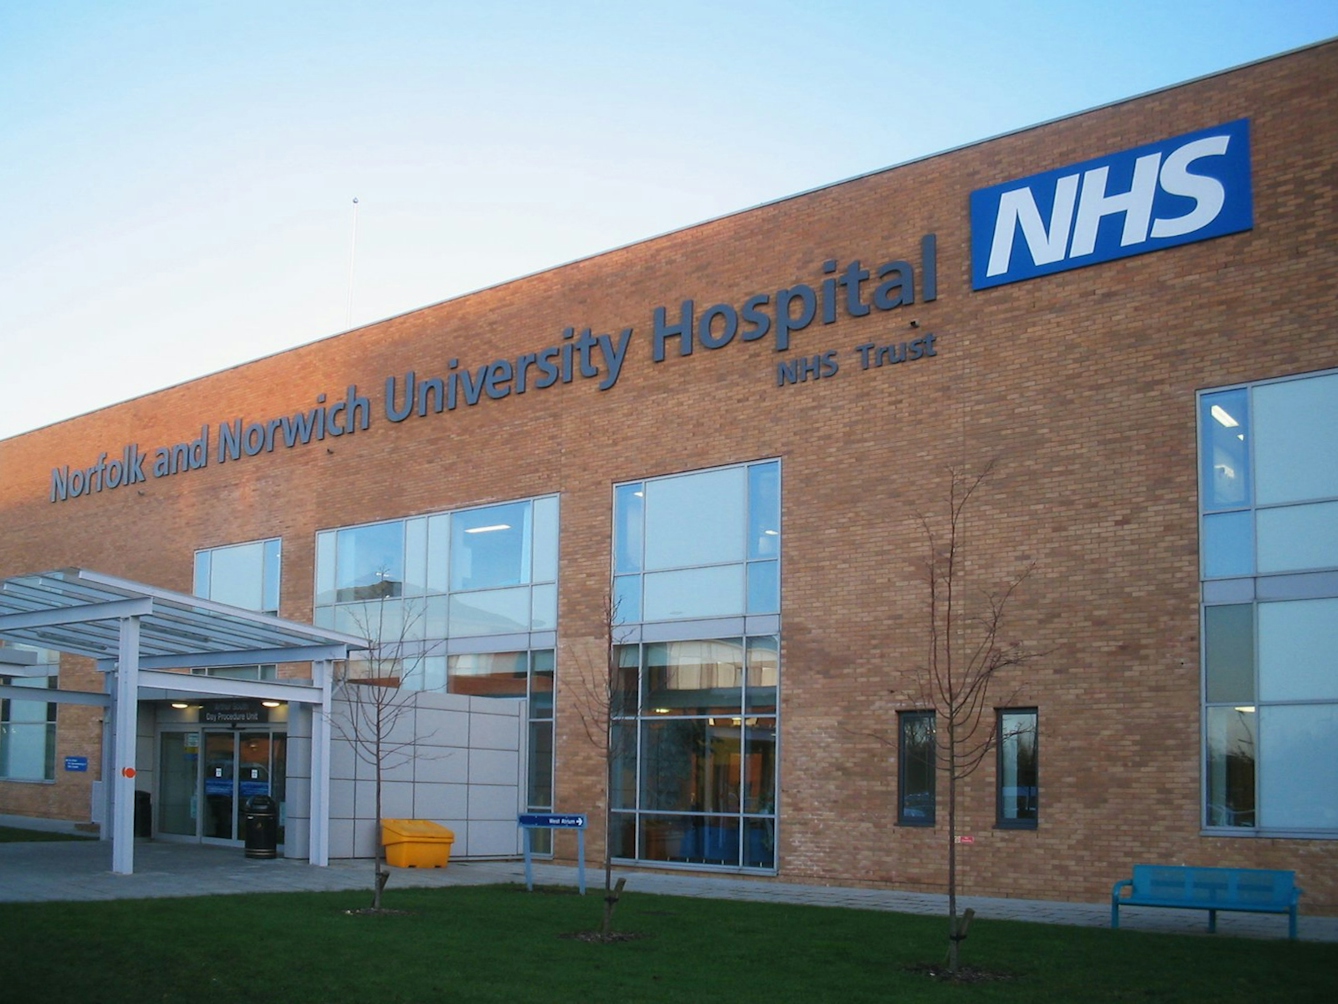 Colour photograph of the entrance to the Arthur South Day Procedure Unit at the Norfolk and Norwich University Hospital. Building is made of brick with large glass windows and a glass entranceway, and has a sign across the top with the name of the hospital trust and with NHS logo.